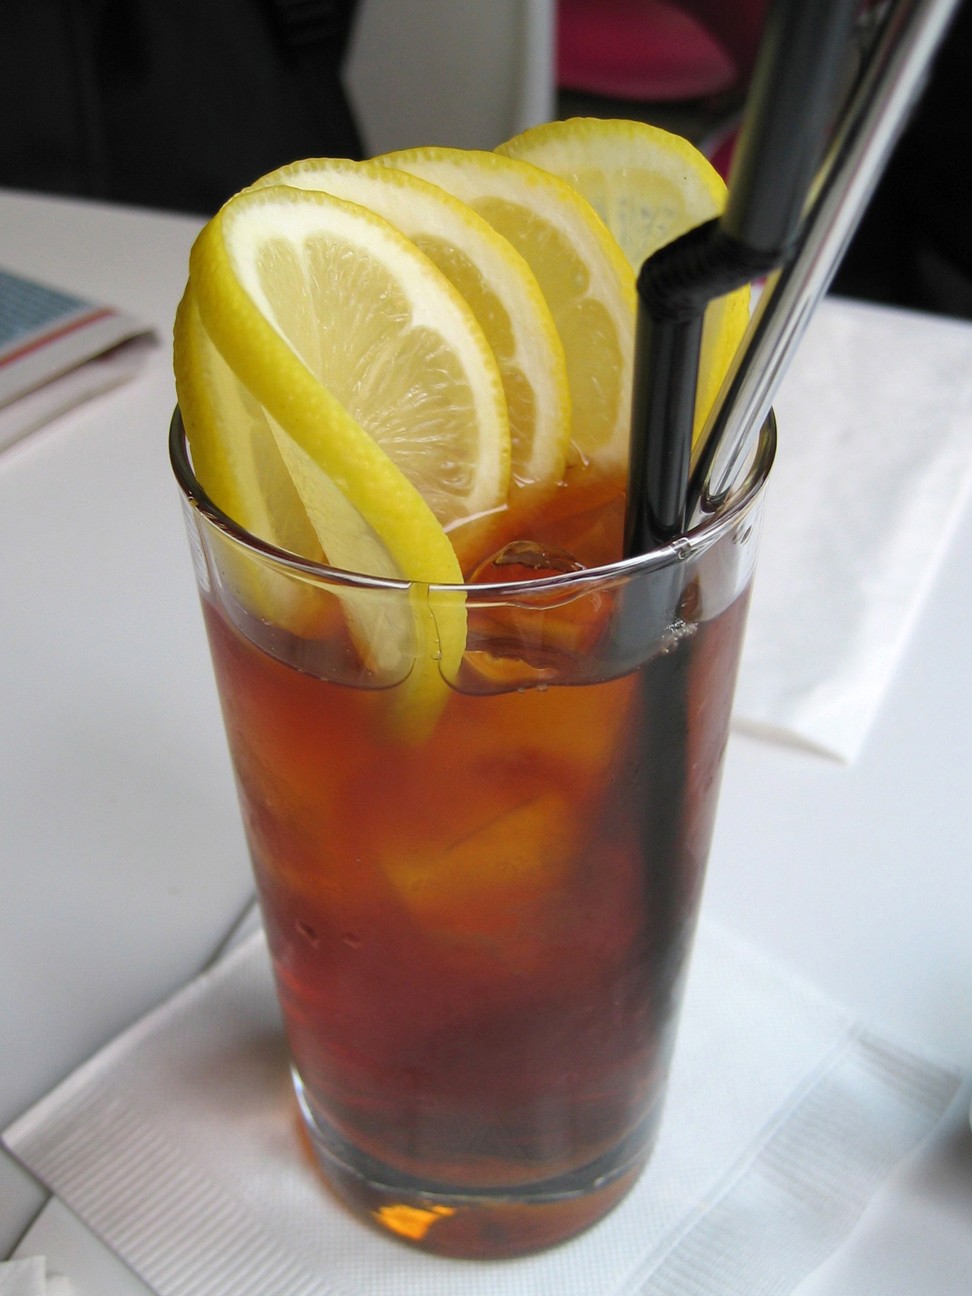 An iced lemon tea can contain as much as six spoons of sugar. Photo: Handout